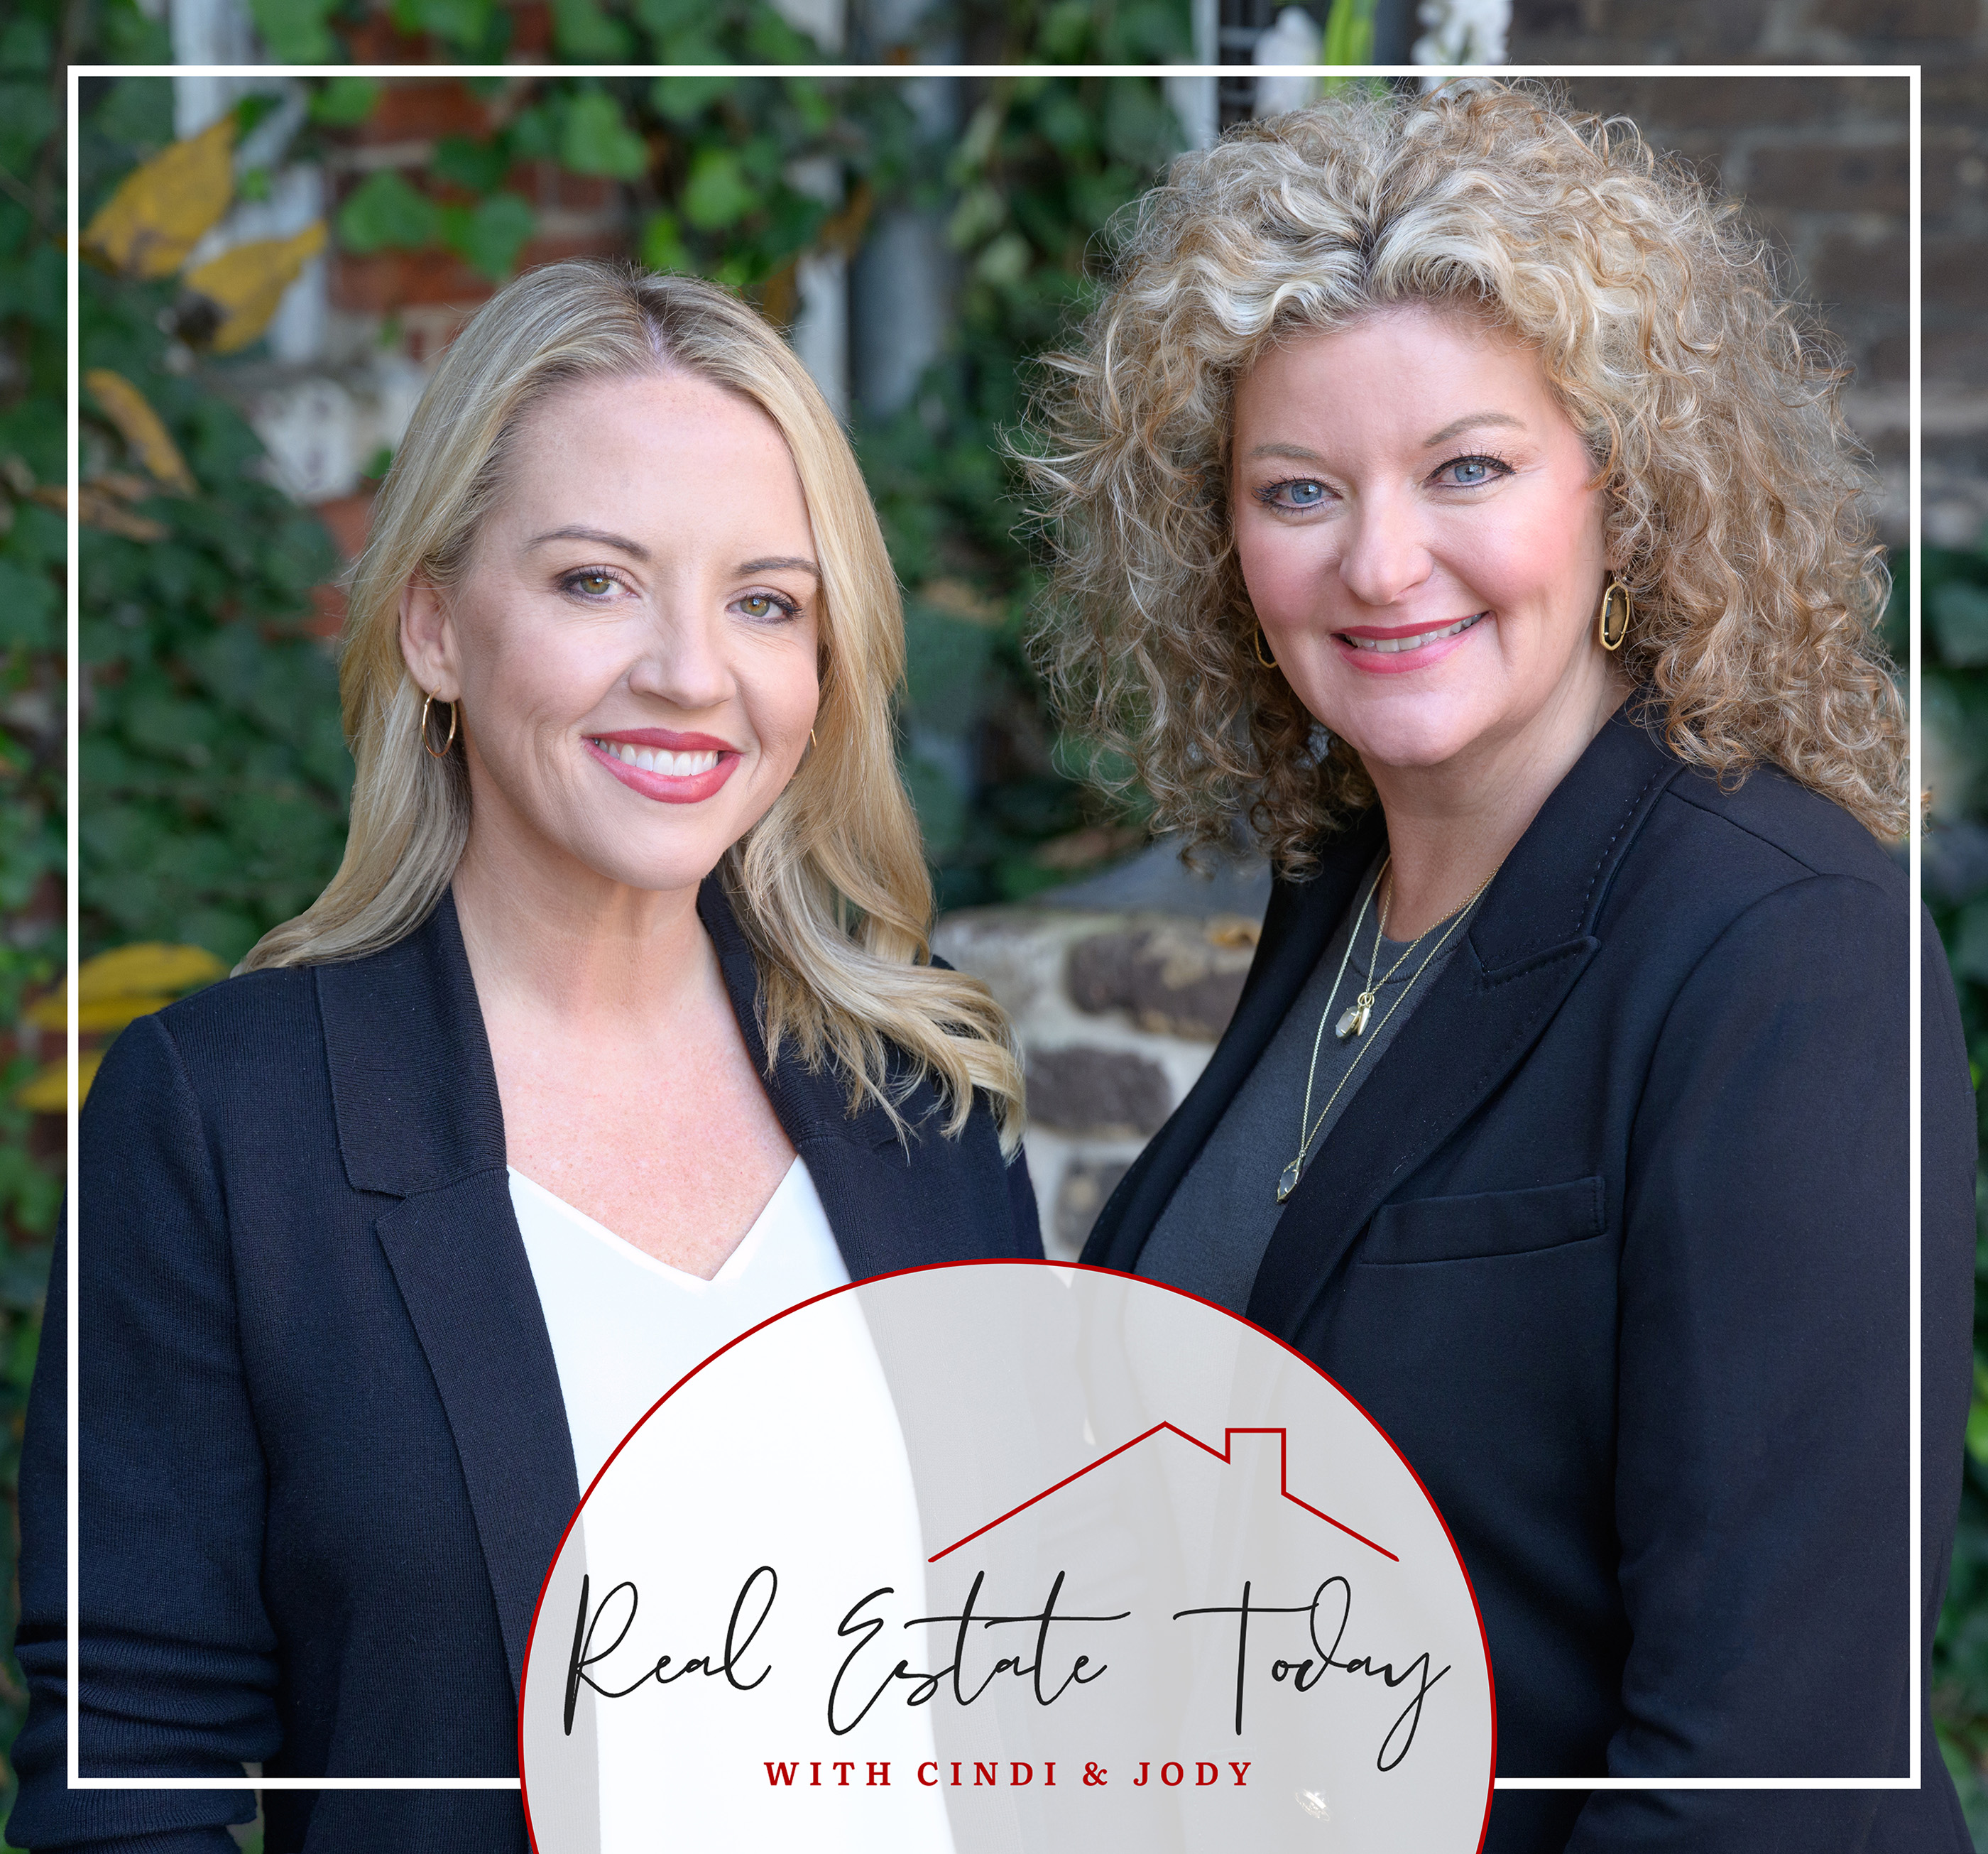 Real Estate Today with Cindi and Jody